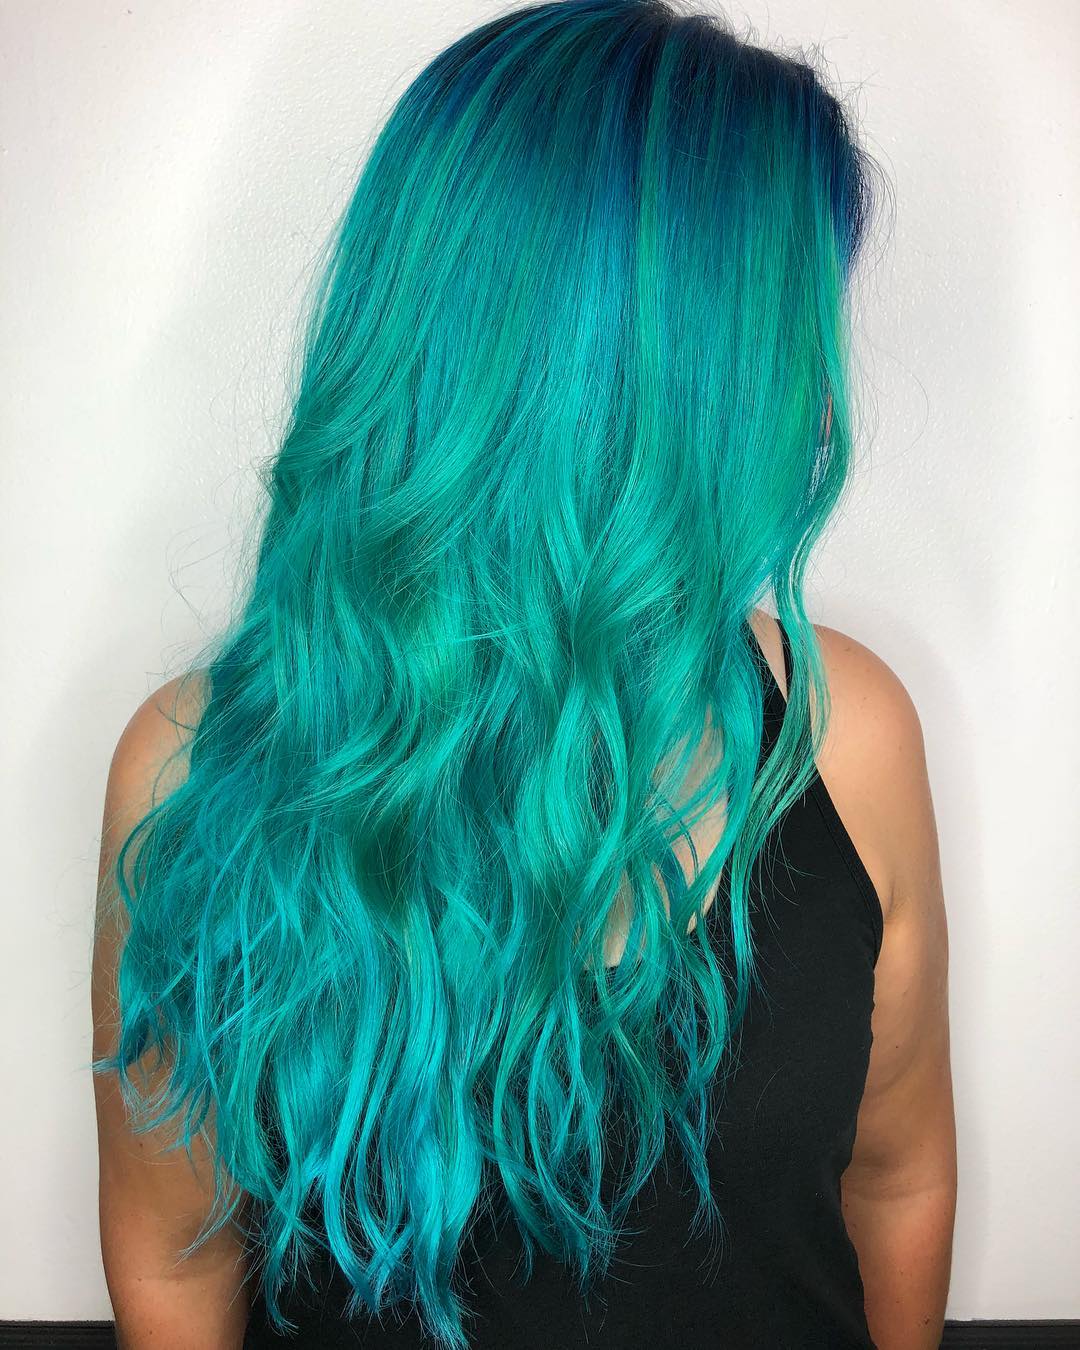 Teal and Light Blue Ombre Mermaid Hair